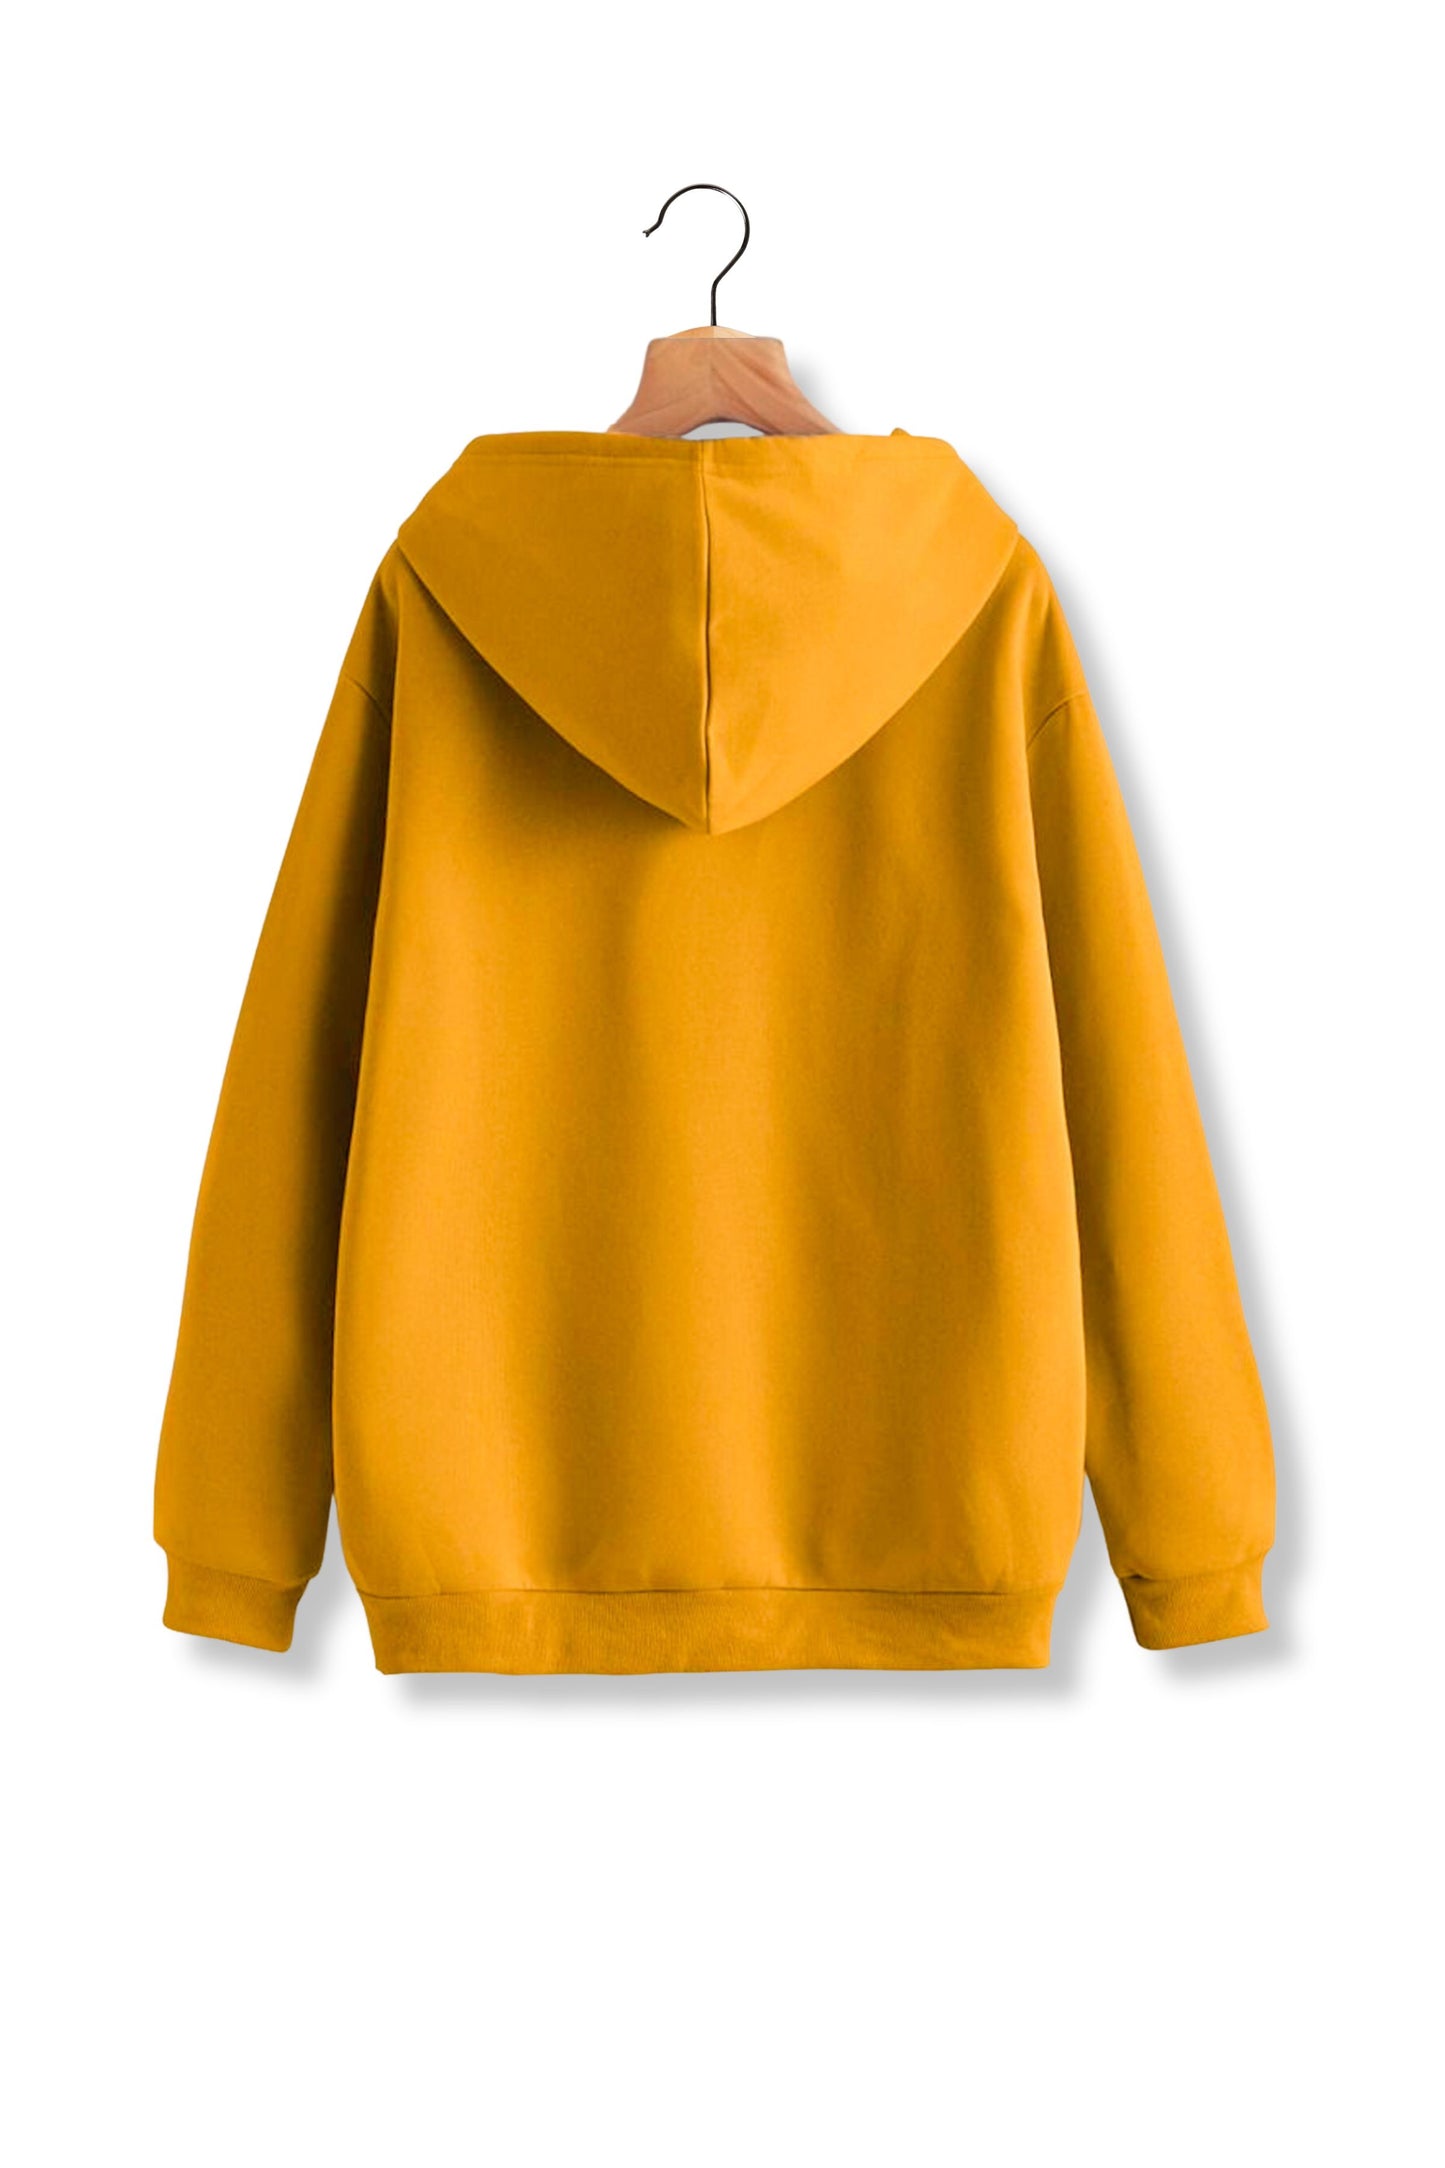 Unisex French Terry Hoodies - Mustard